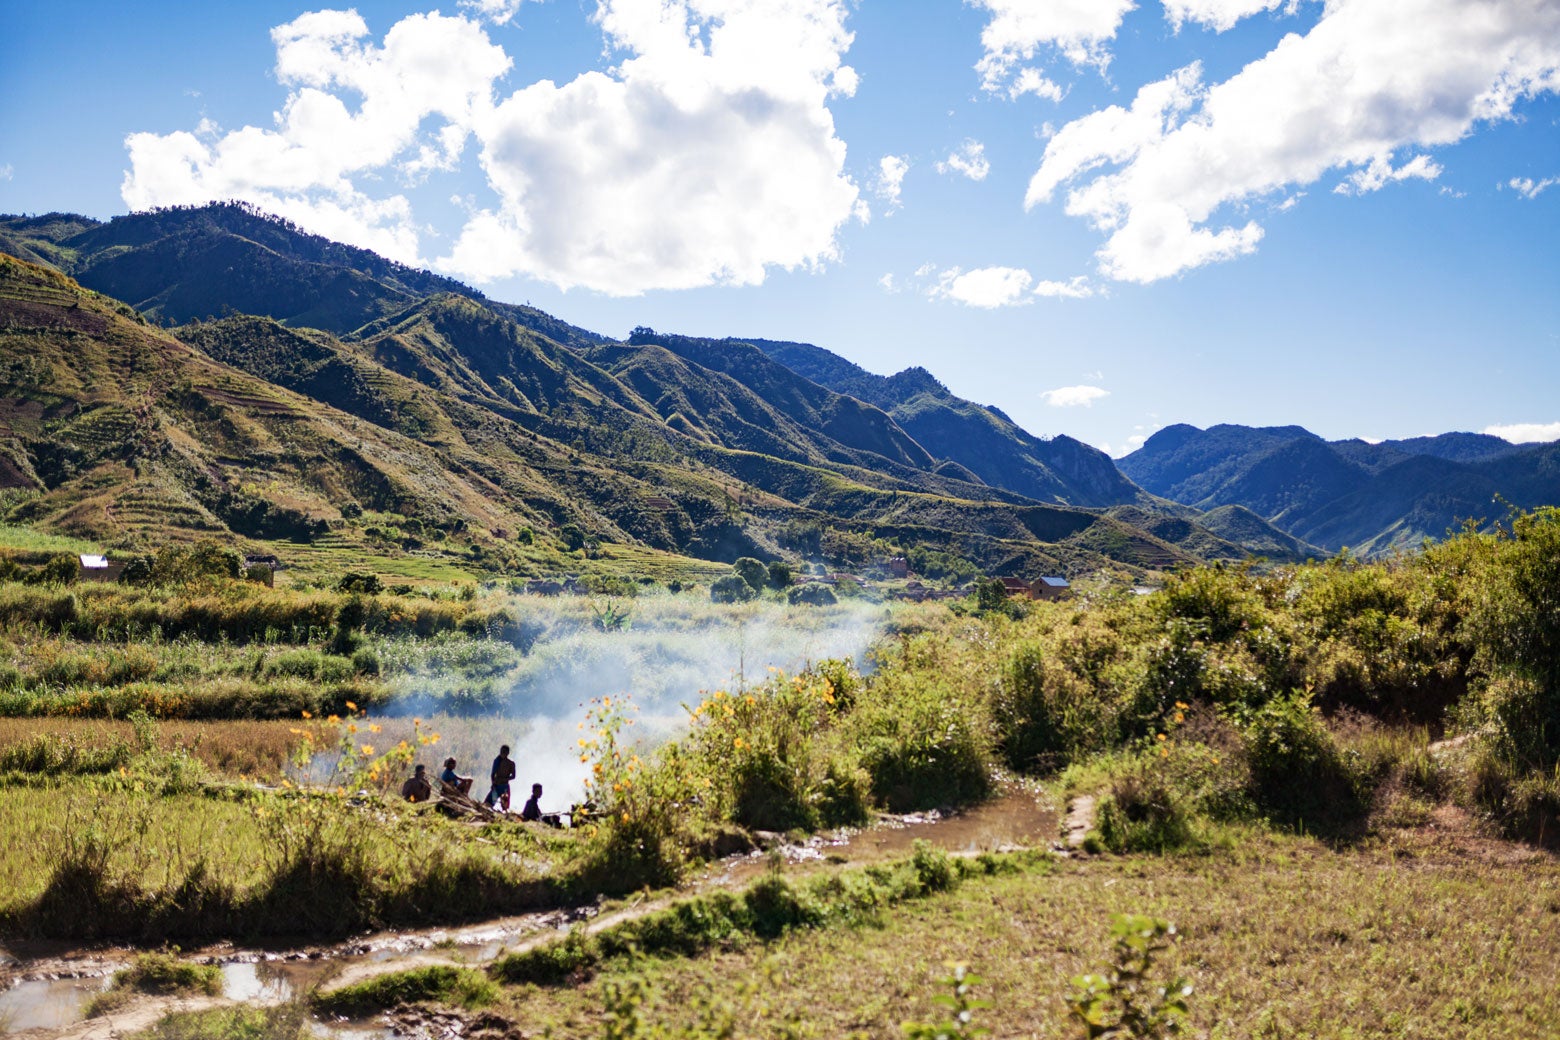 Isolation perpetuates tradition in these hidden valleys. Here, the labor of Madagascar’s   moonshine pass unchanged between generations.